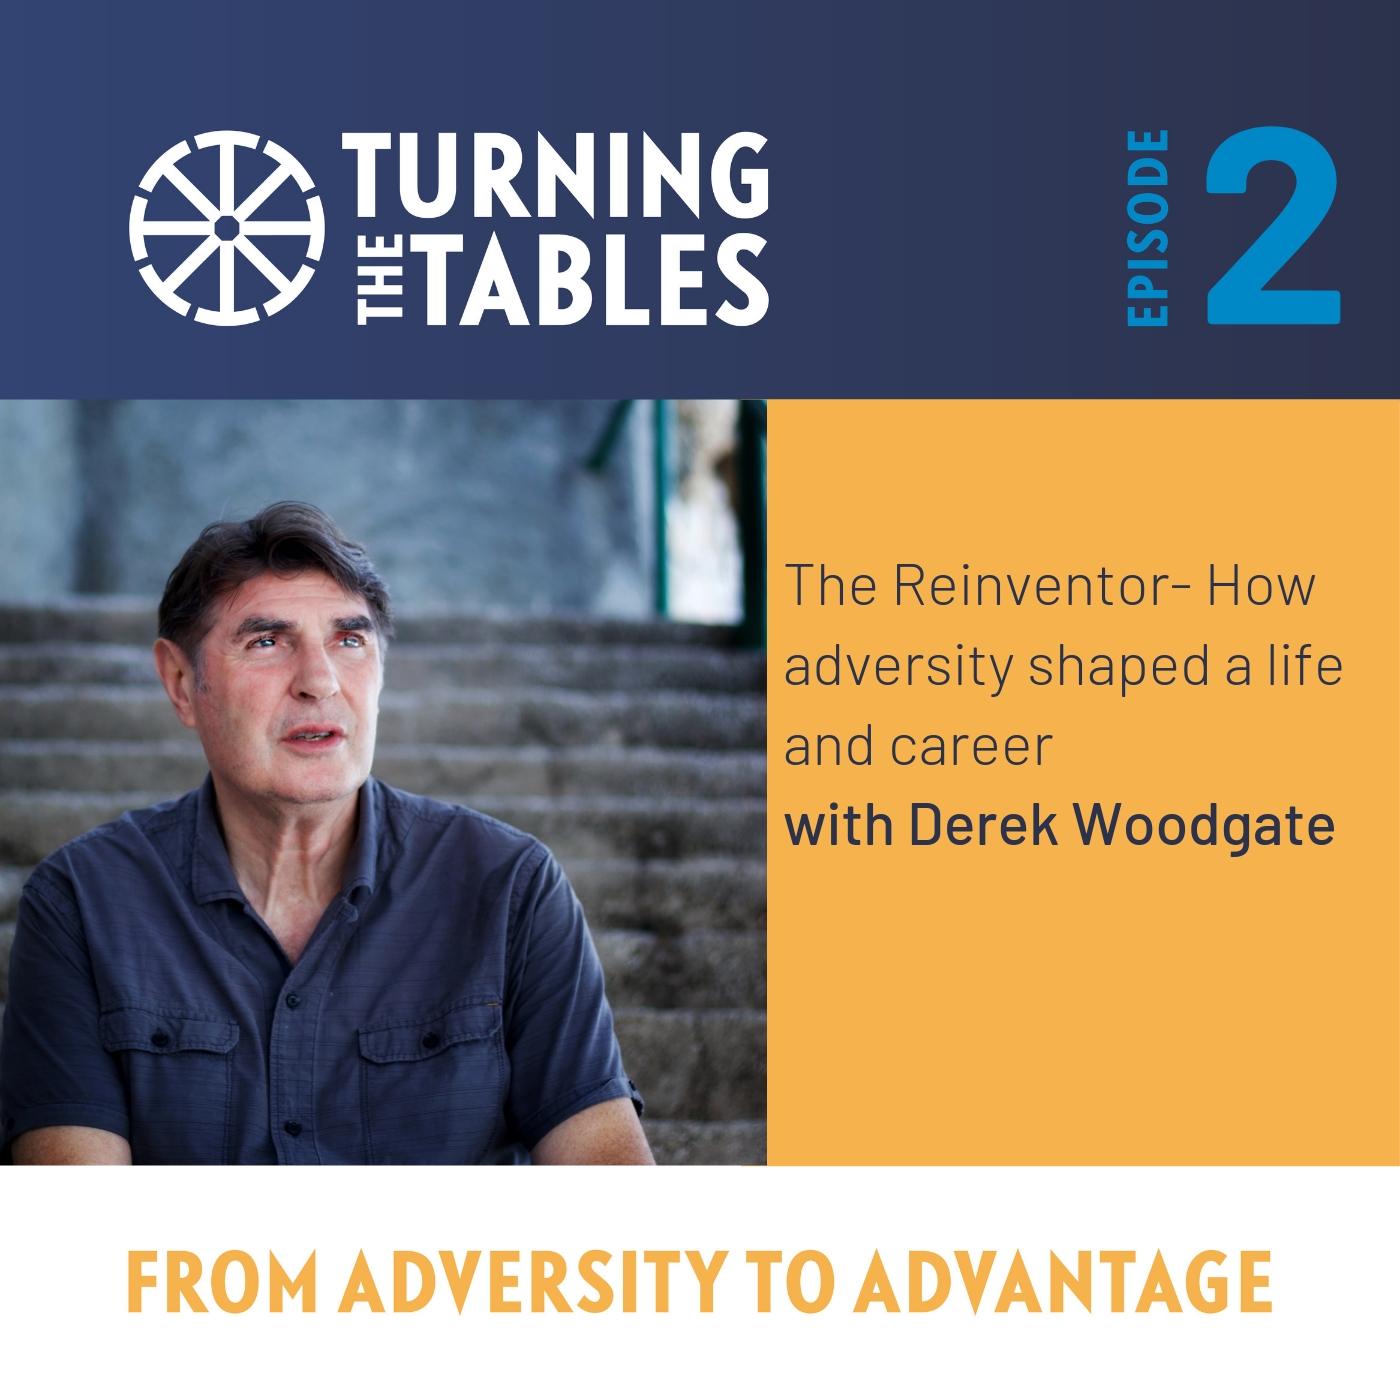 EP 2:The Re-inventor - How adversity shaped a life and career with Derek Woodgate